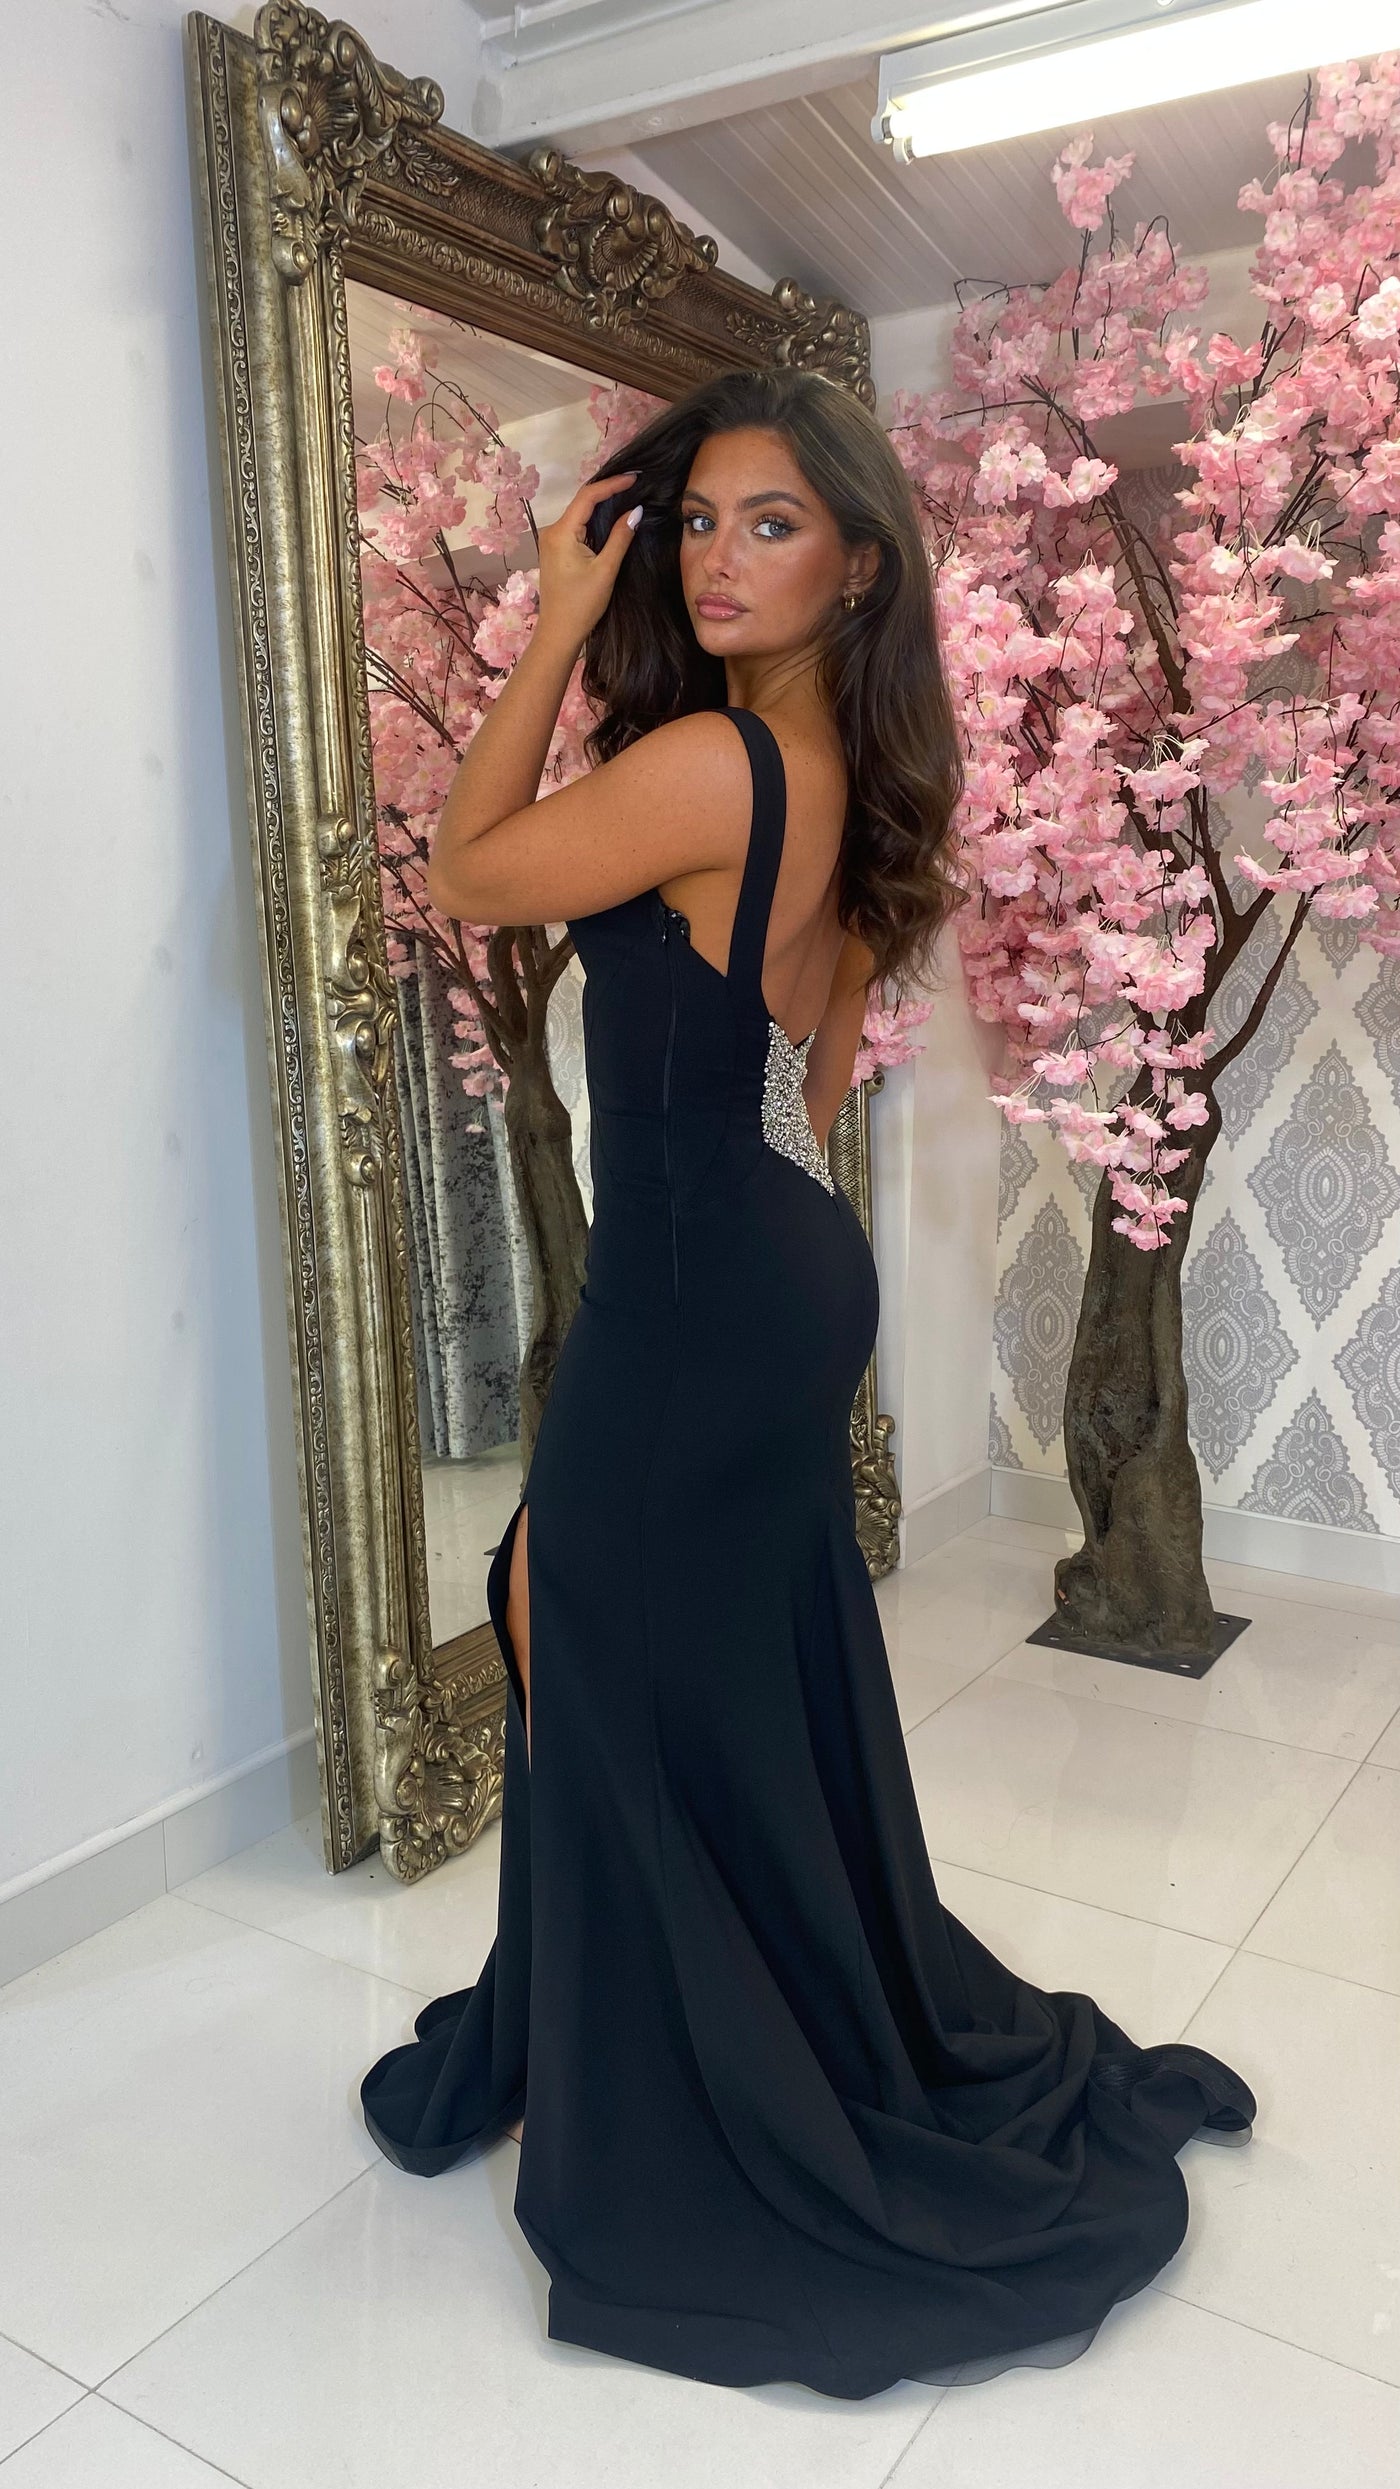 Black High Neck Backless Silver Jewels Full Length Gown